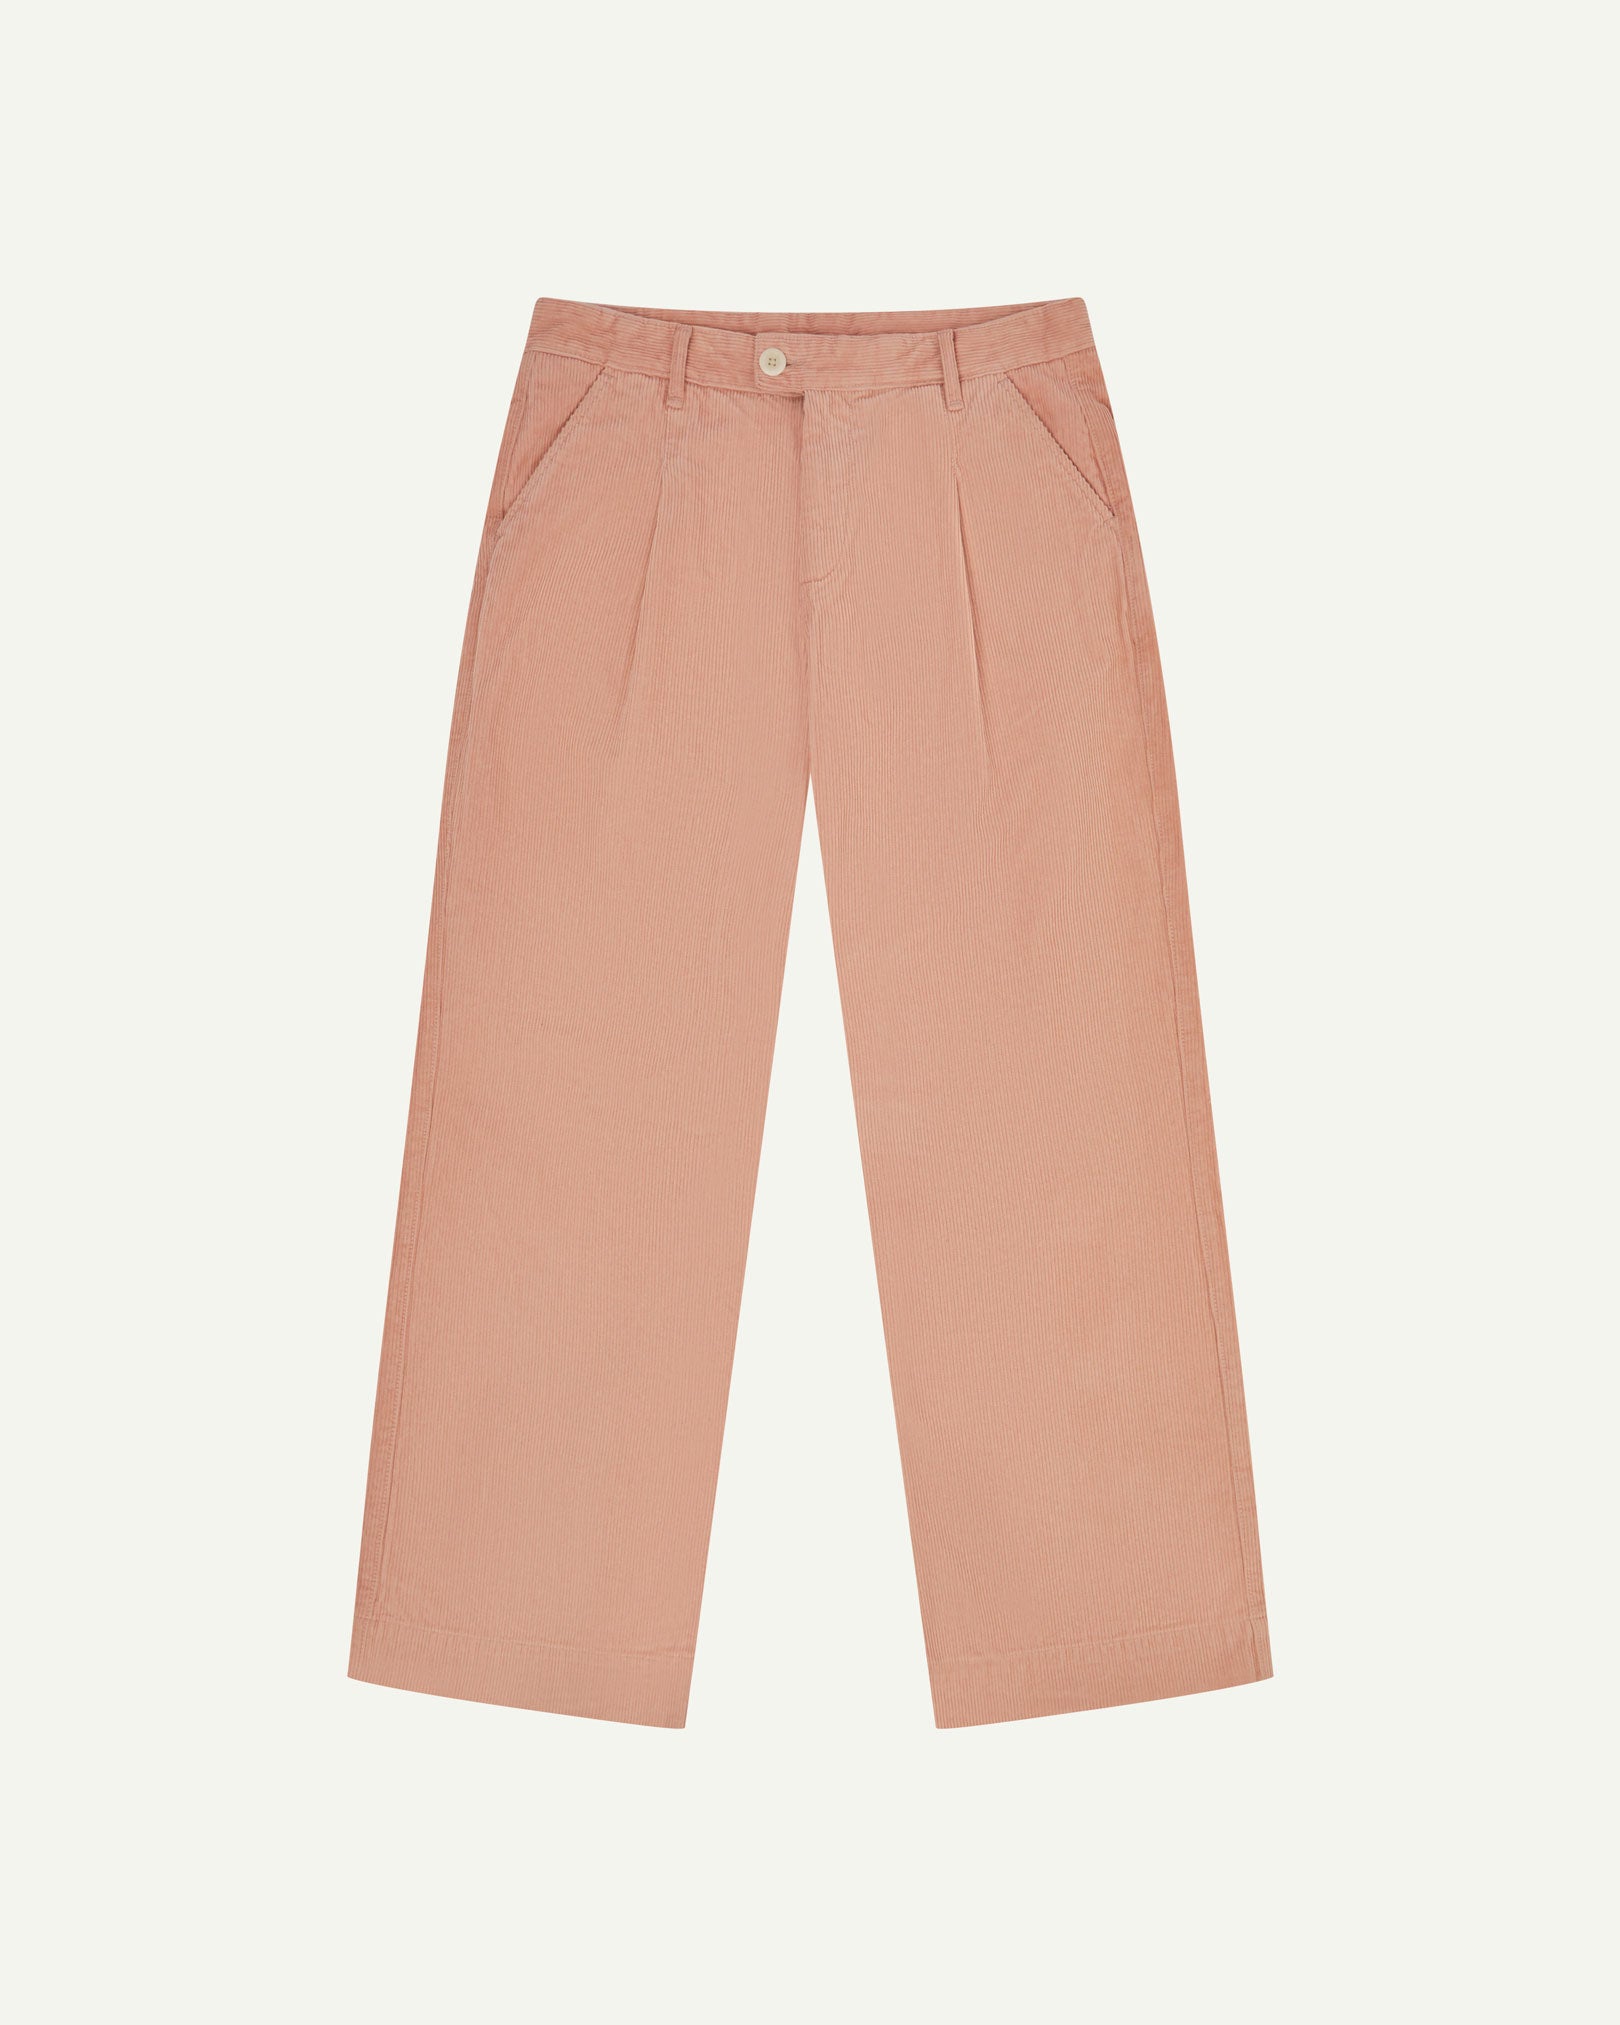 Front flat view of Uskees cord boat pants in dusty pink. Showing Corozo button fastening and wide leg fit.